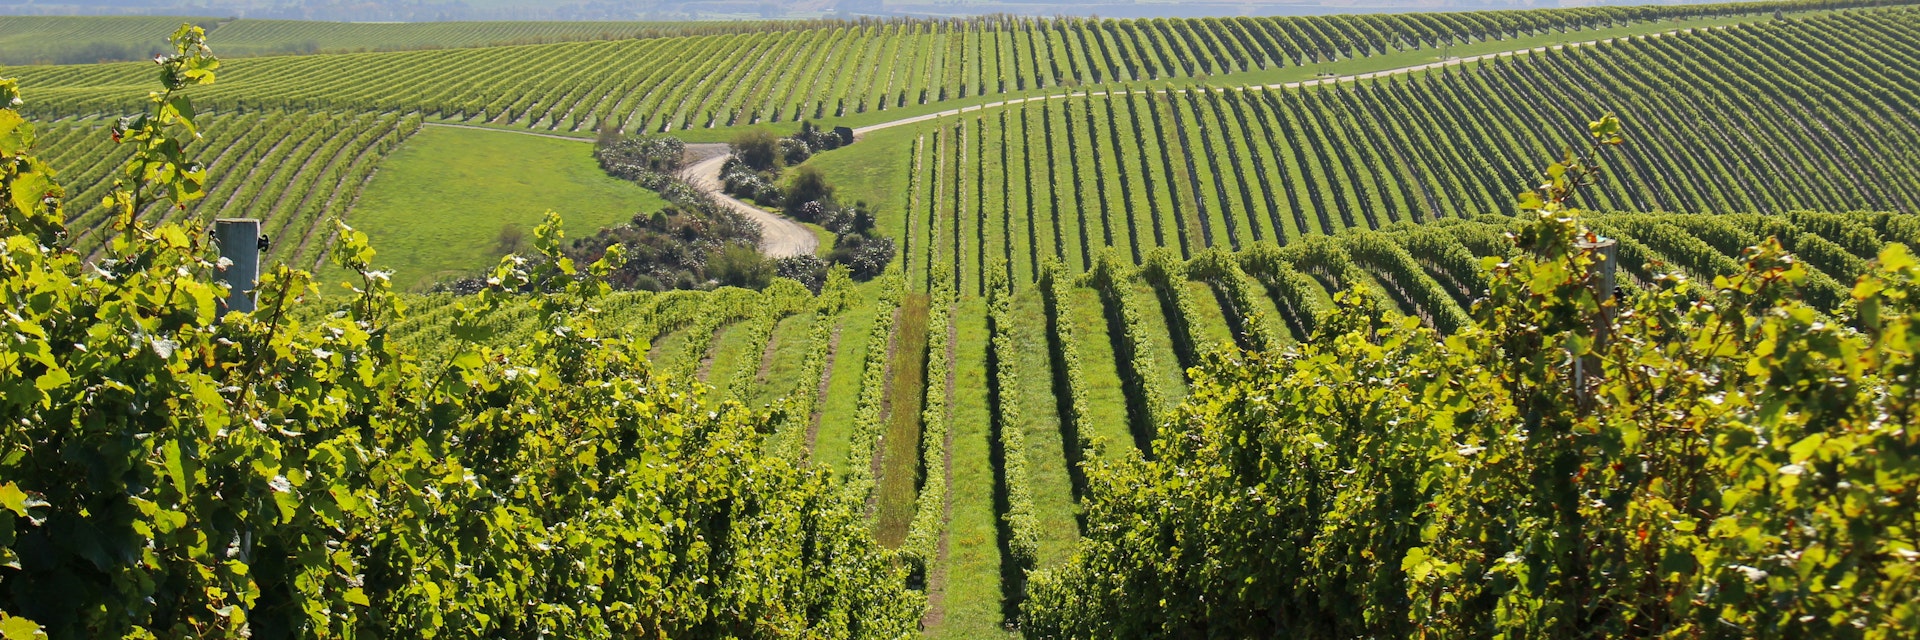 Vineyards on the White Road Tour at Peter Yealands Cellar door wine estate in New Zealand's south island.